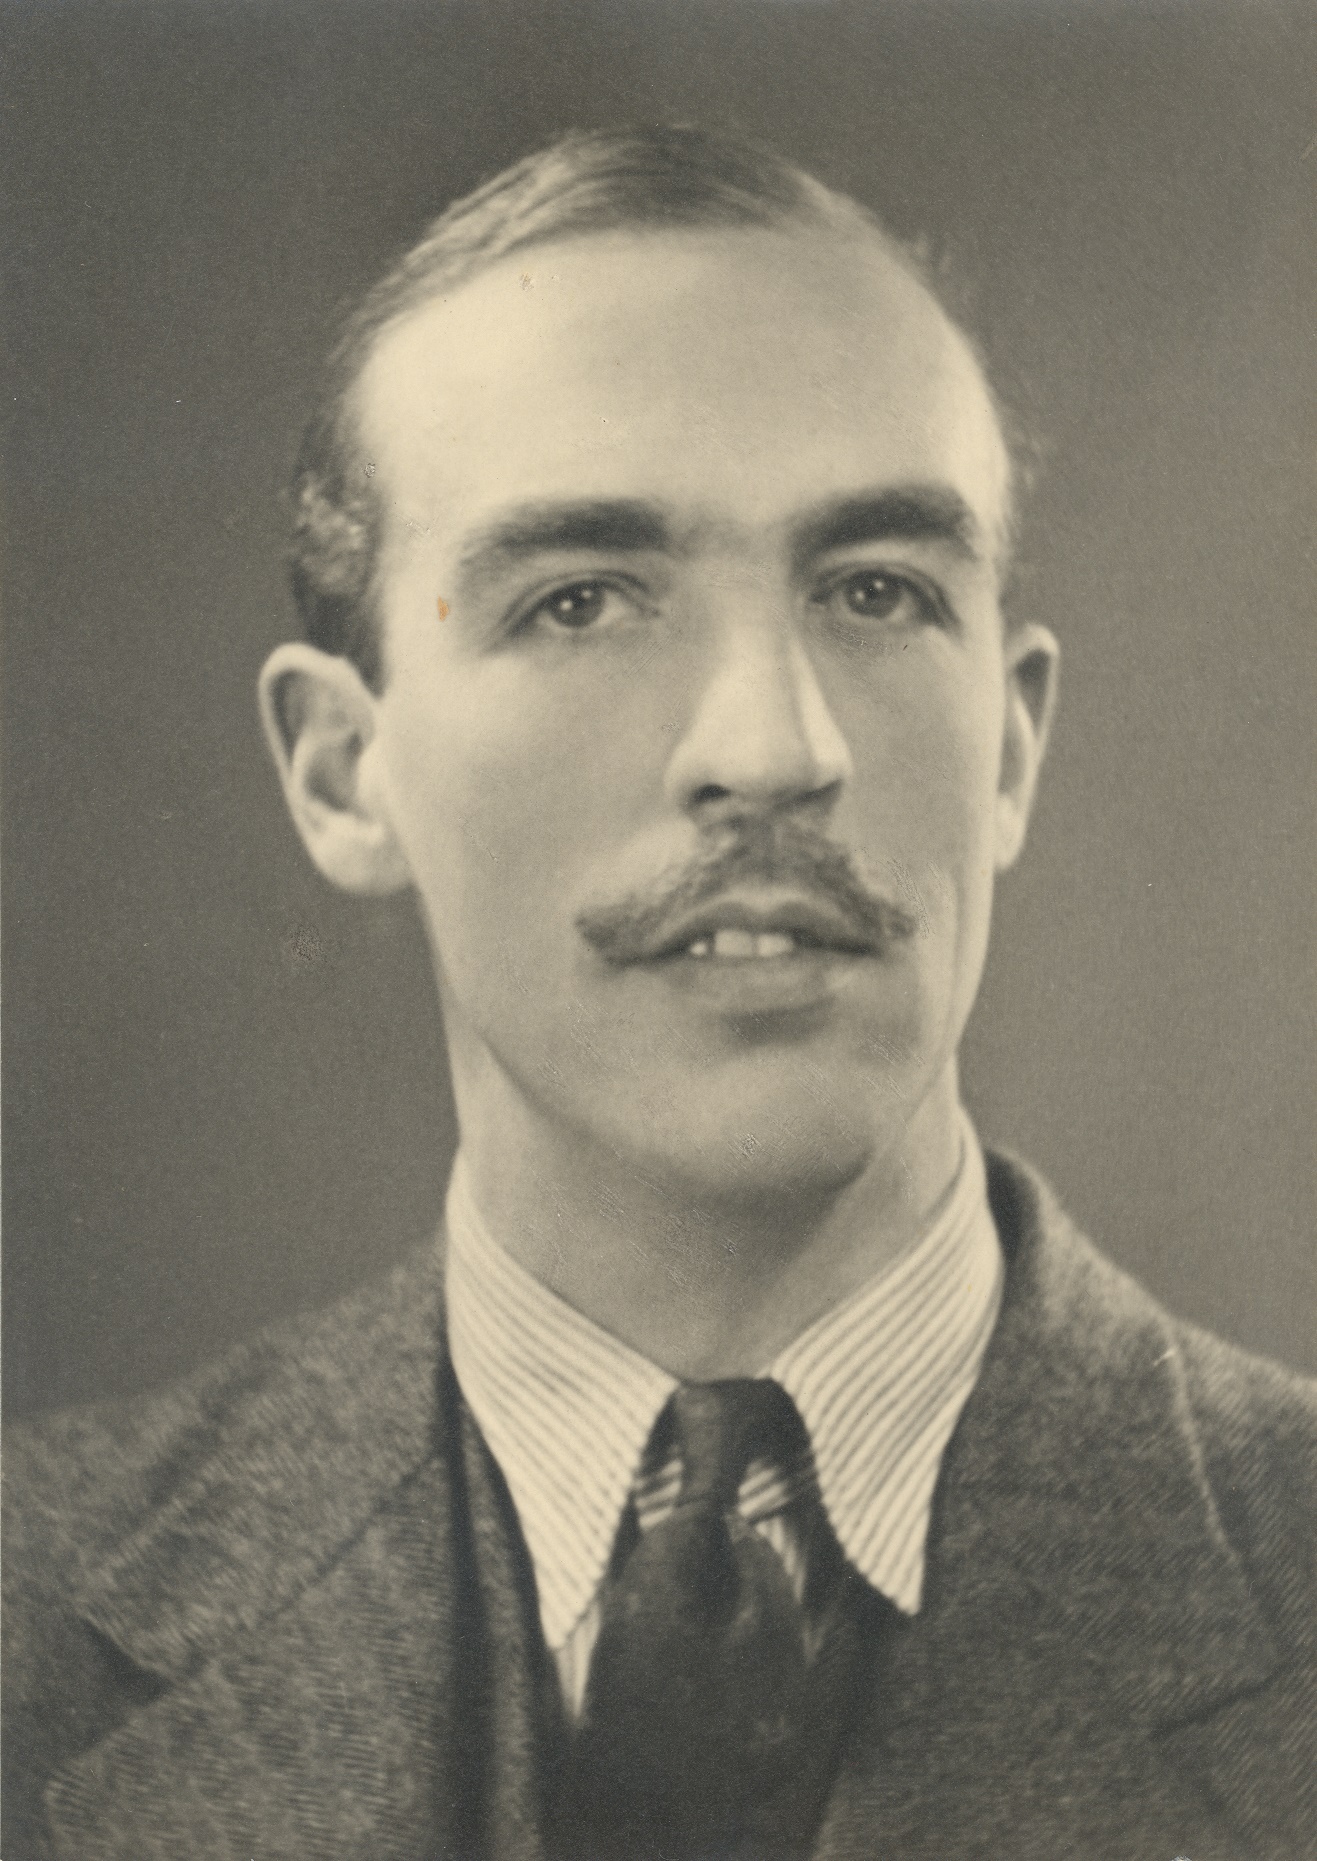 A black and white photograph of Robert John Brooke Gill, taken in the late 1940s when he was in his late-30s.